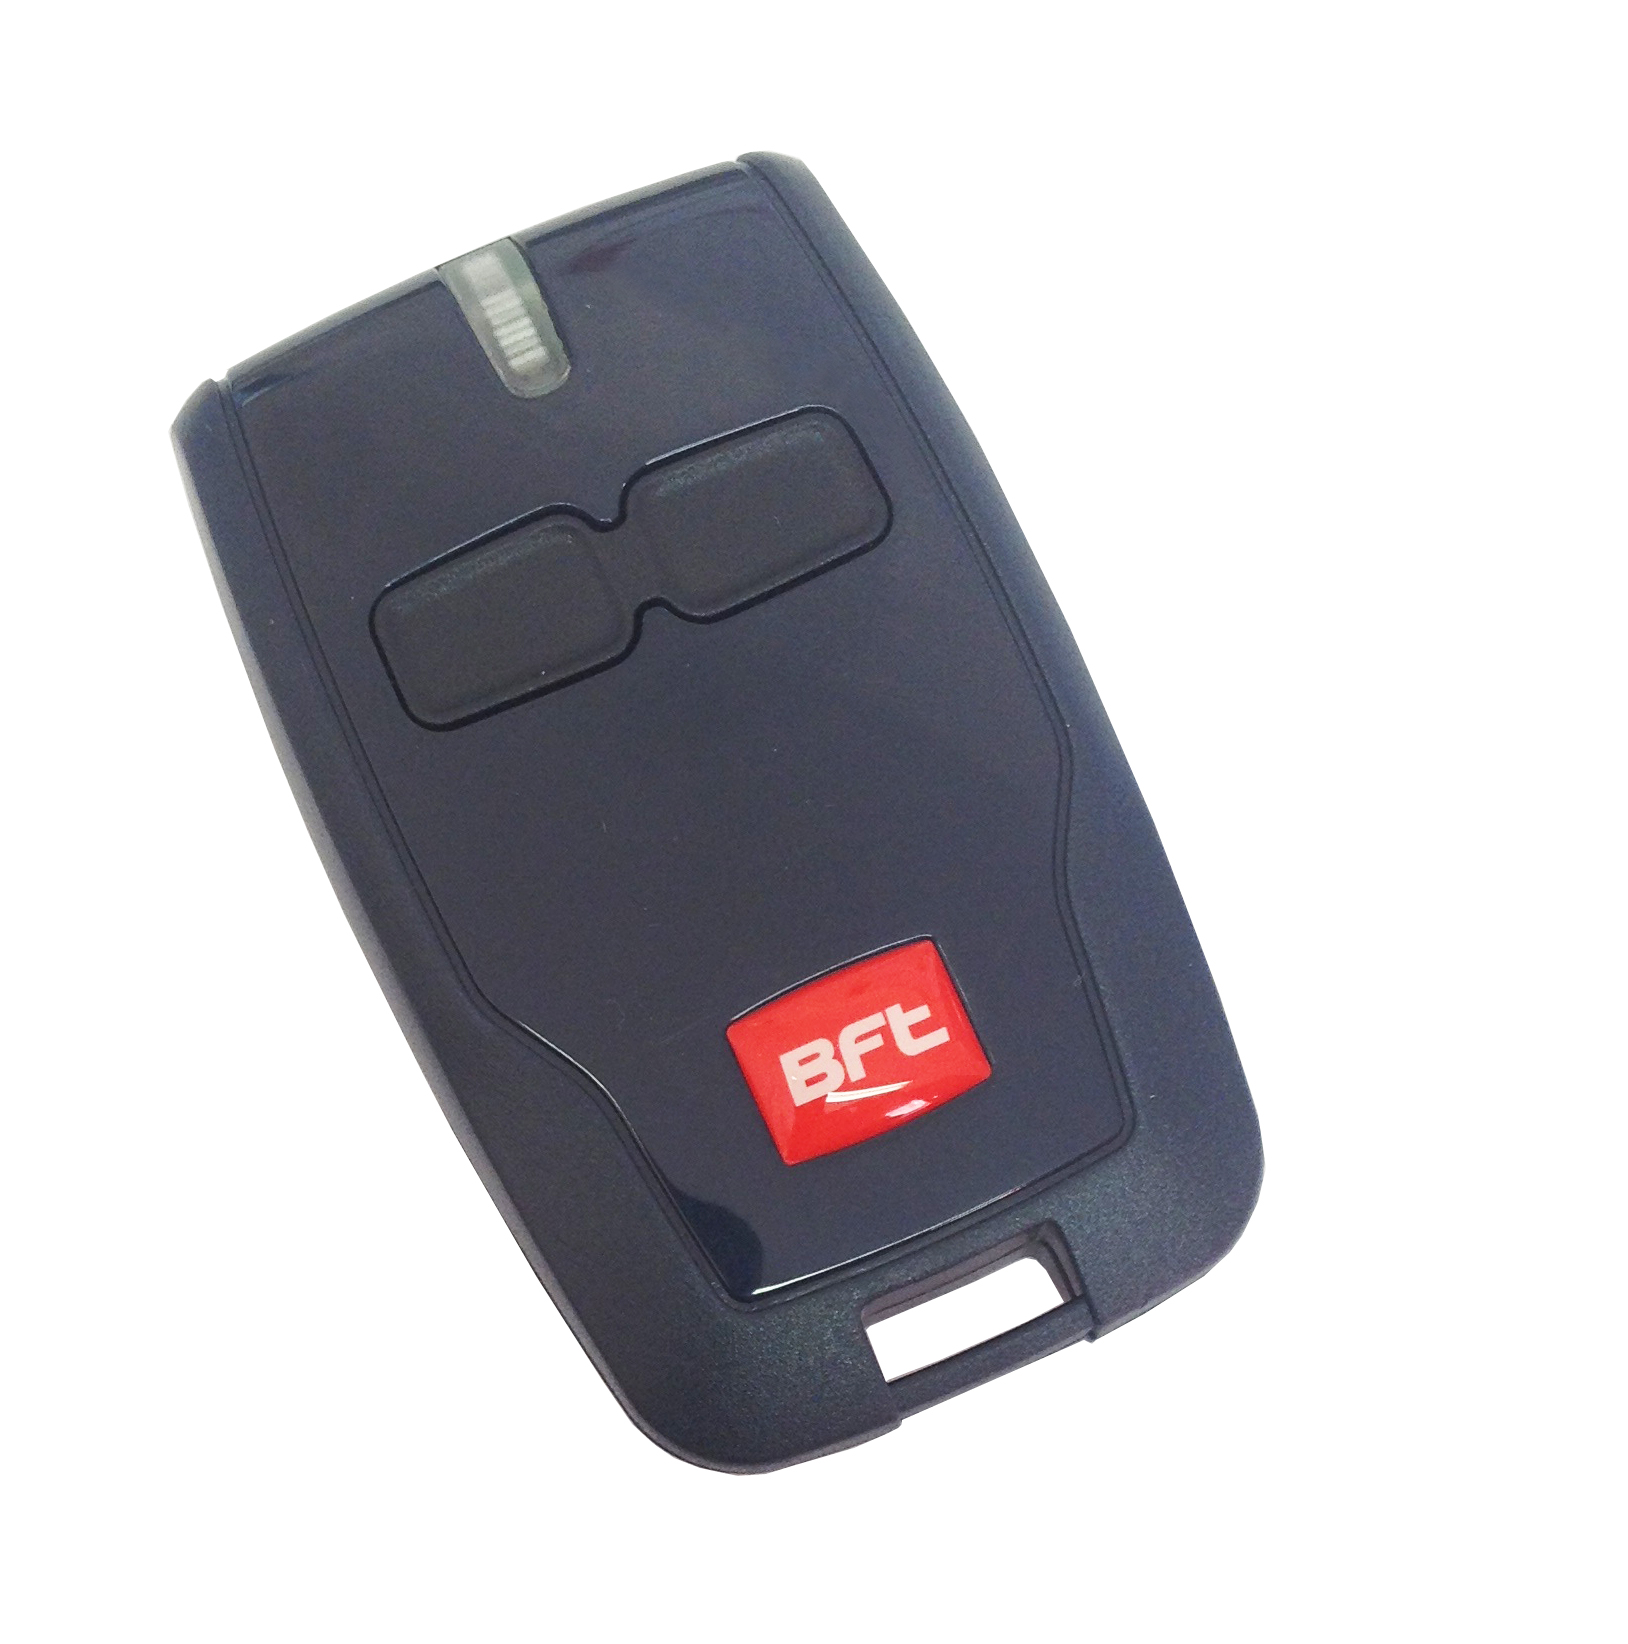 Garage D111904 Gate BFT Mitto 2 Two Button Remote Control Transmitter D111750 